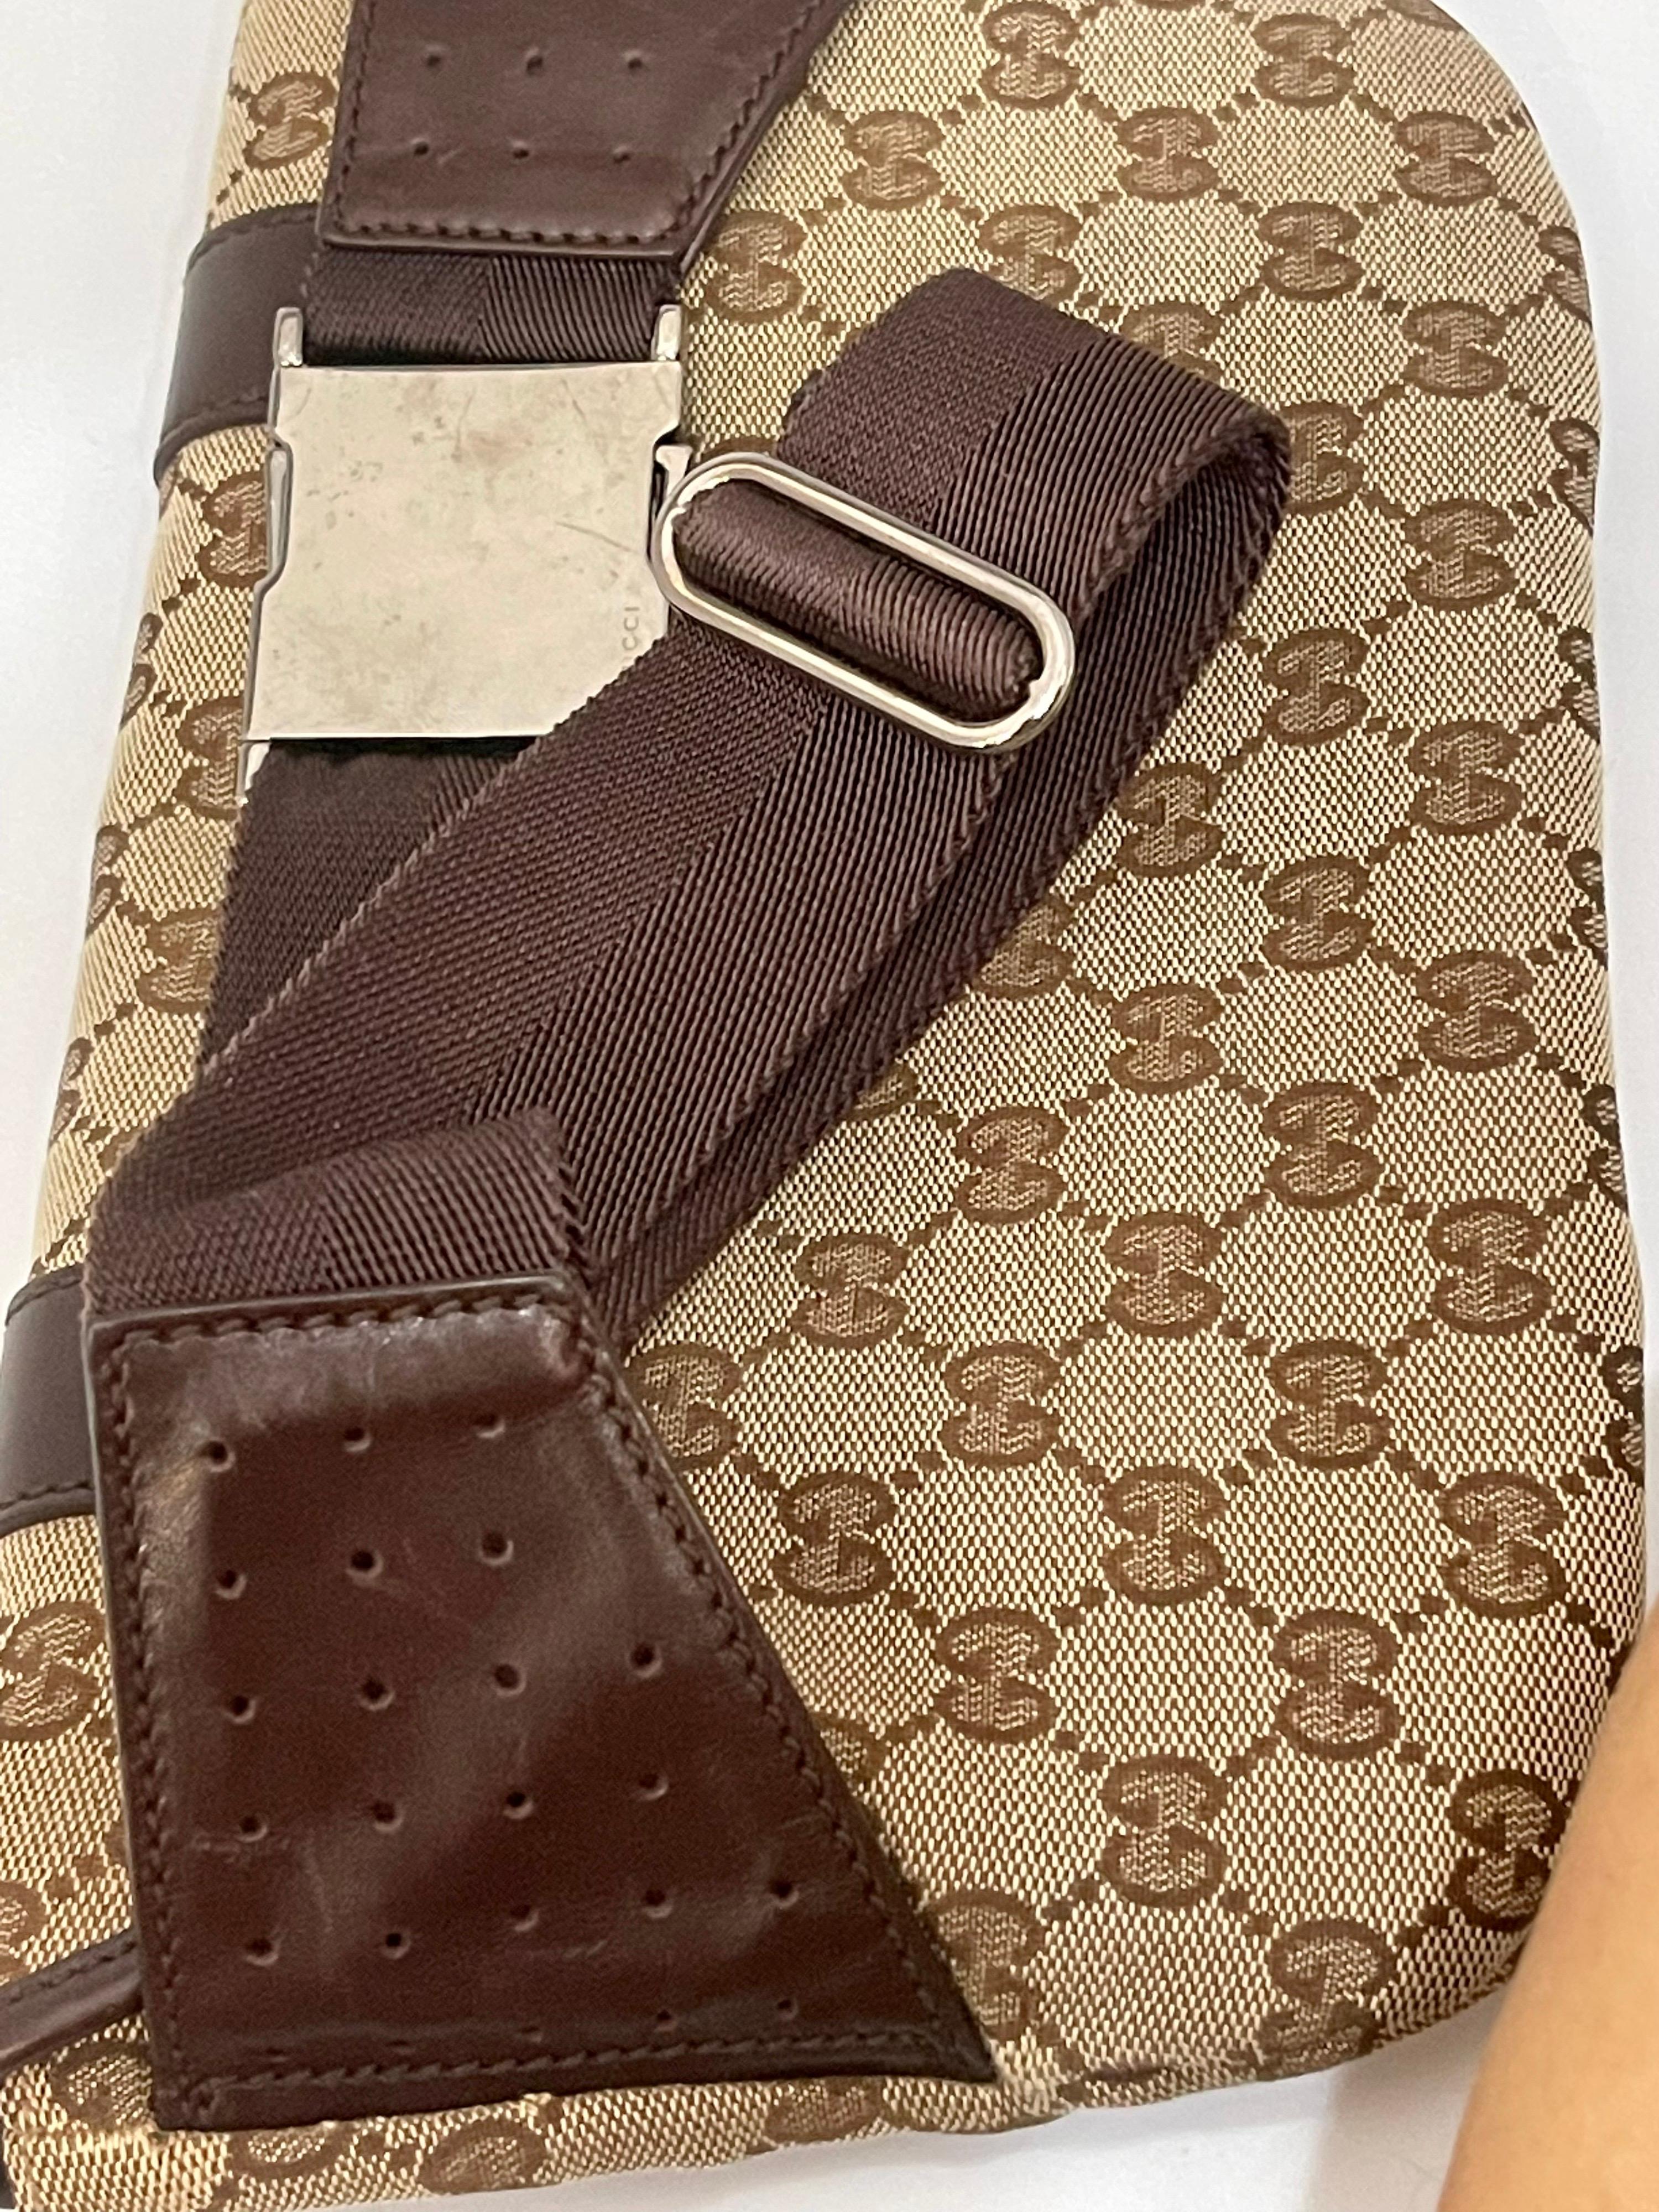 baby carrier gucci